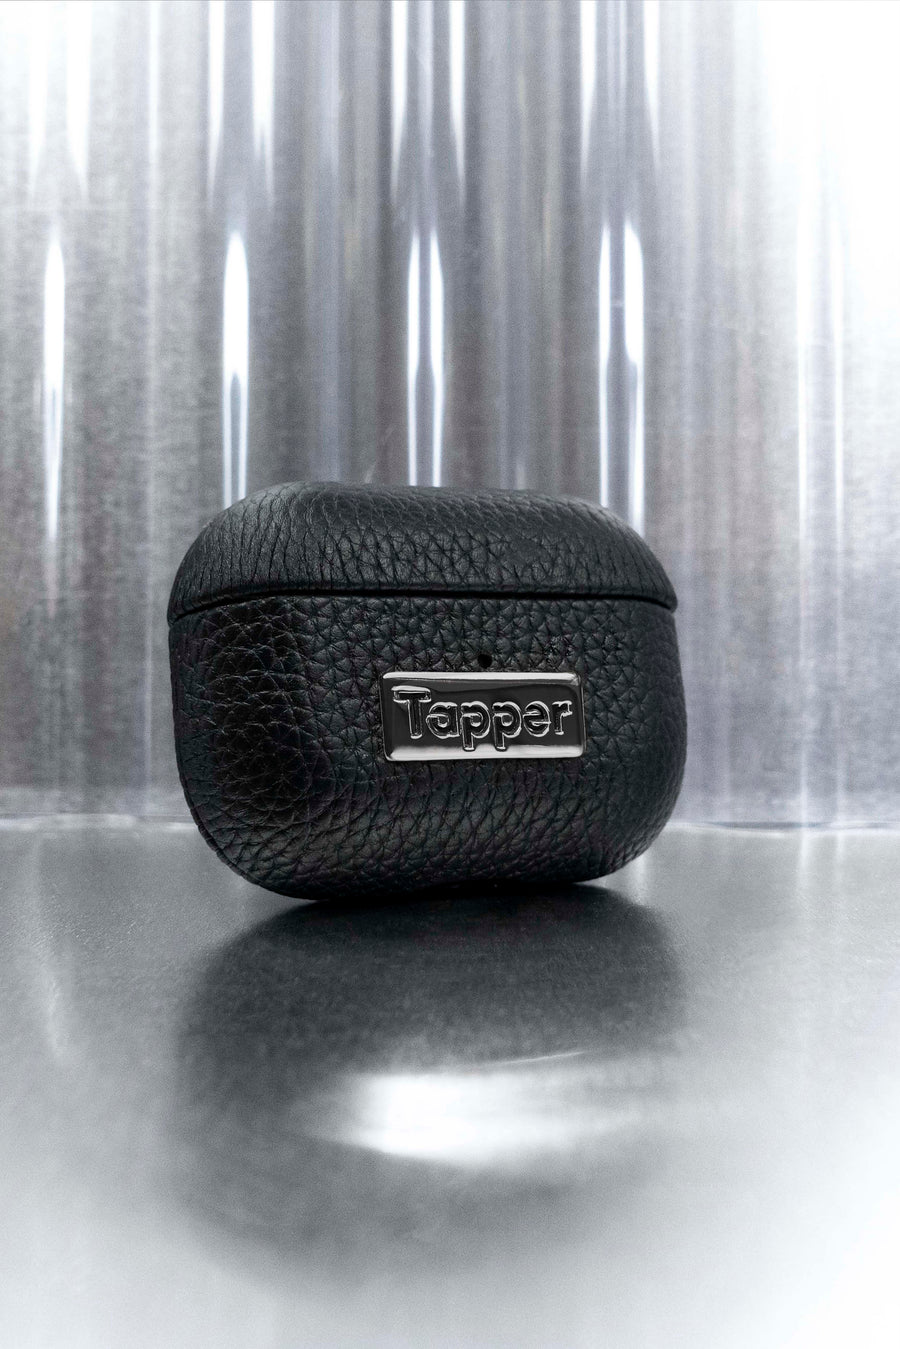 Tapper's luxurious black genuine cow leather AirPods Pro case protects and elevates the look of your AirPods Pro. The luxurious, protective case for AirPods with a metal logo plate in hematite black plating steps up your AirPods game. The next must-have high end protective Apple AirPods accessory in real leather and precious metals. Compatible with AirPods Pro. Designed in Sweden by Tapper. Free Express Shipping at gettapper.com